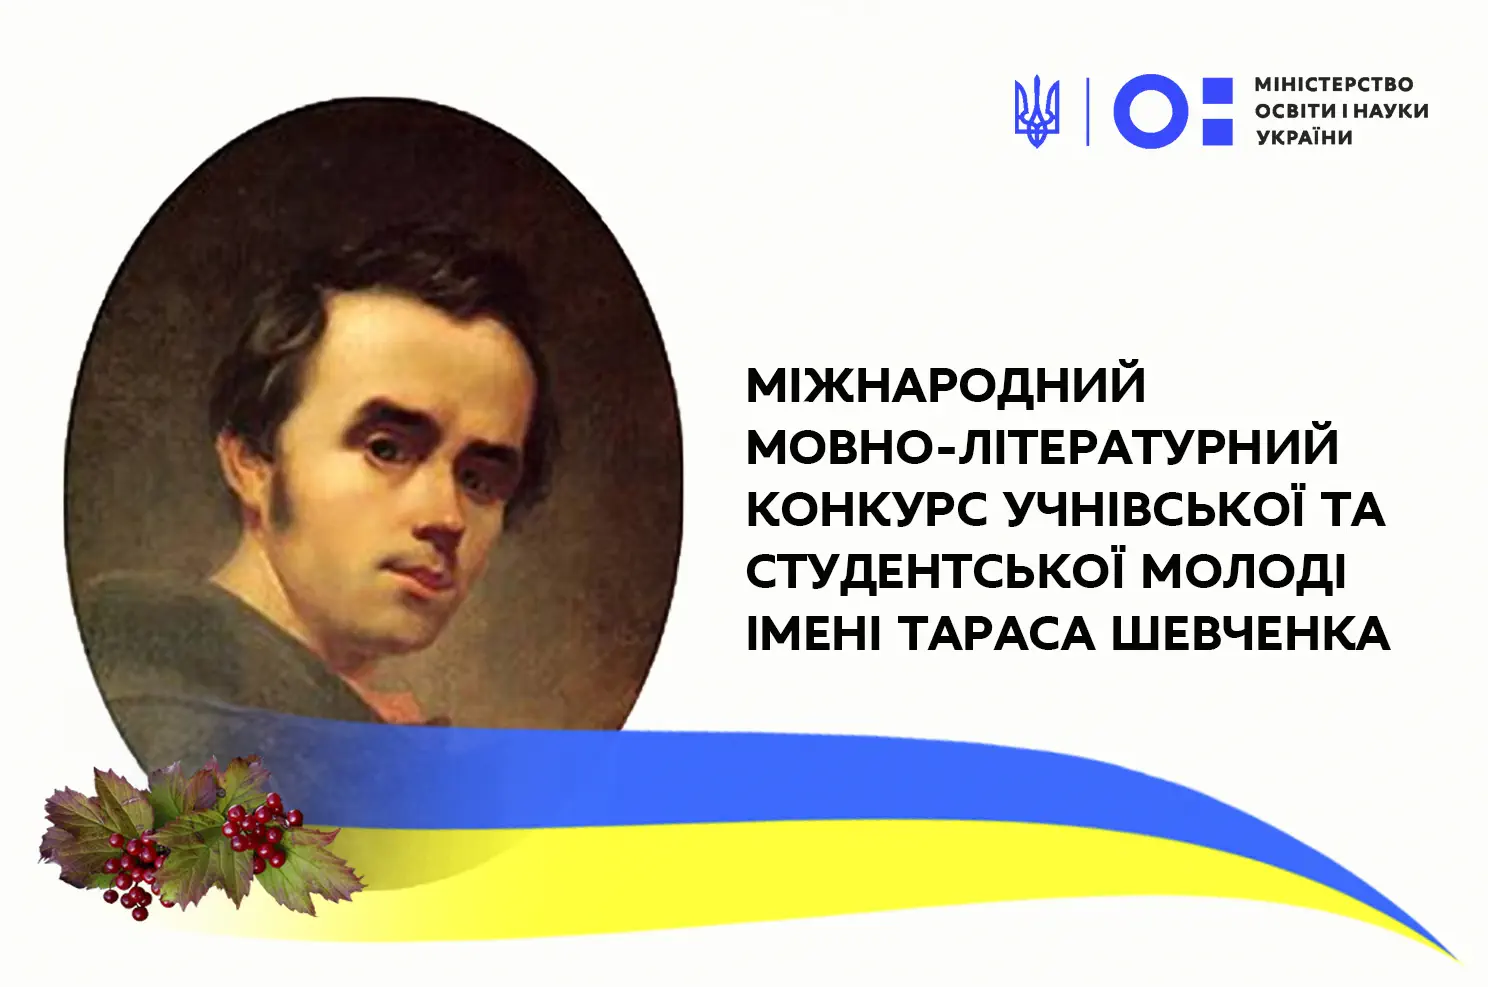 Winners of the first stage of the Taras Shevchenko International Language and Literature Competition for Pupils and Students are determined